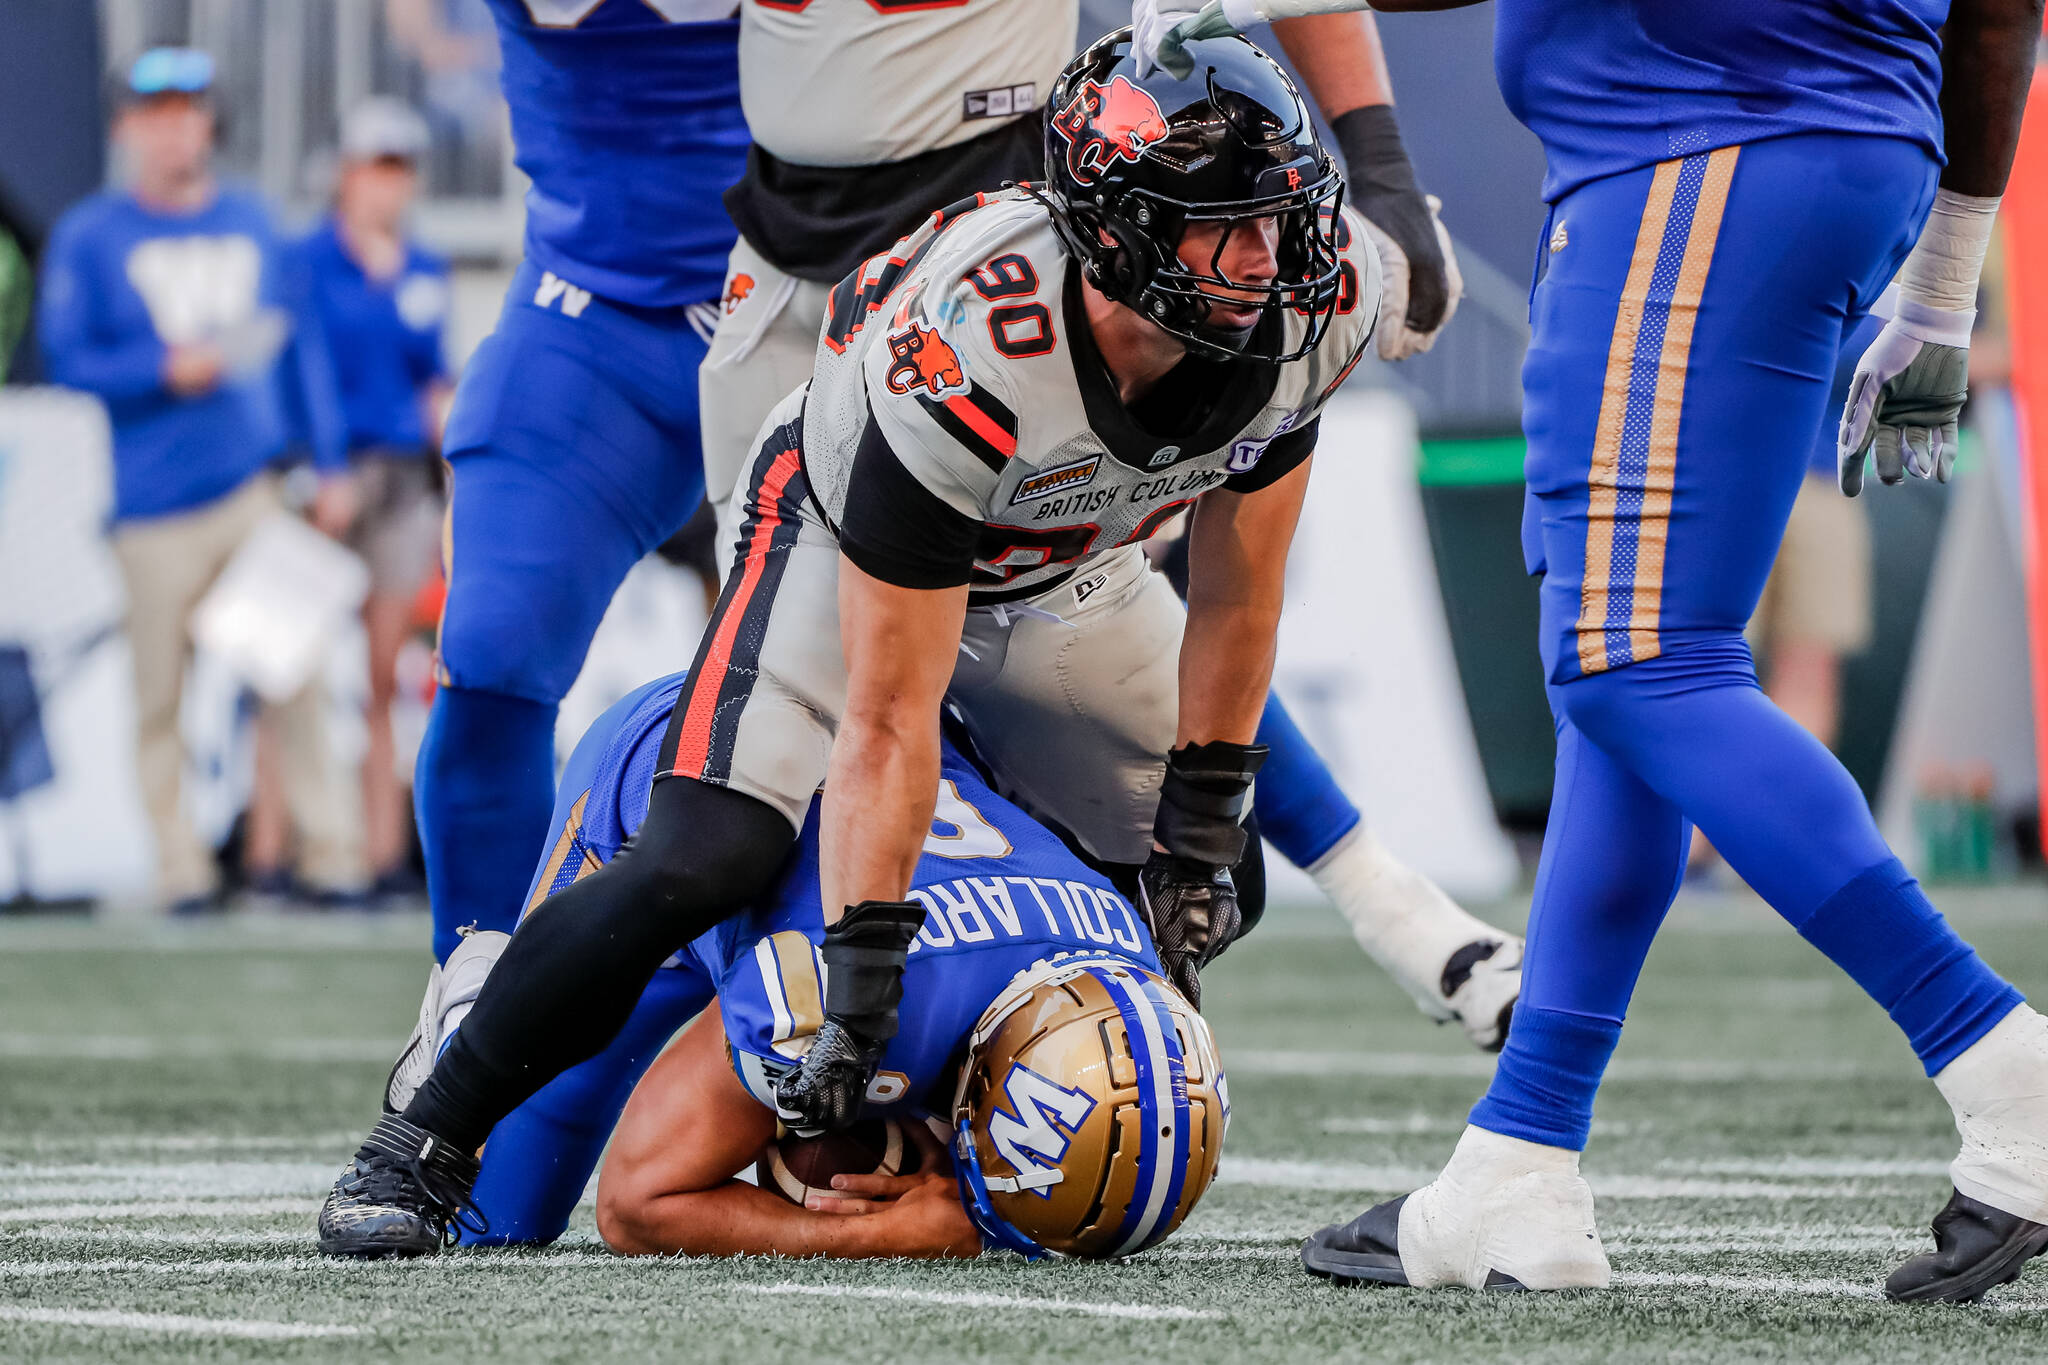 Lions defensive end Mathieu Betts records one of his three sacks of Bombers quarterback Zach Collaros during B.C.’s 30-6 victory in Winnipeg on Thursday night. Photo courtesy of Steven Chang, B.C. Lions